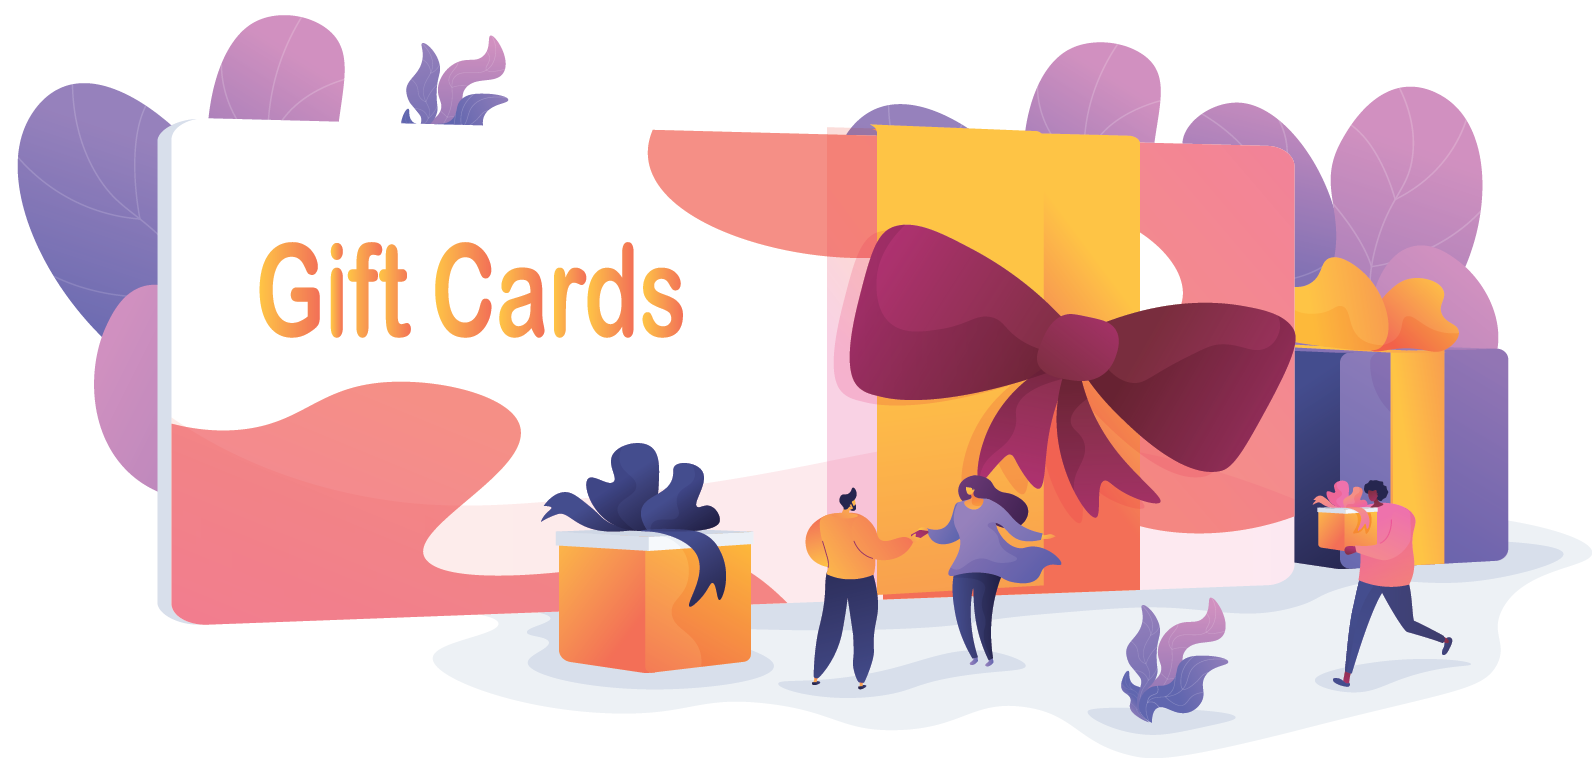 How To Reduce Gift Certificates This Holiday Period post thumbnail image